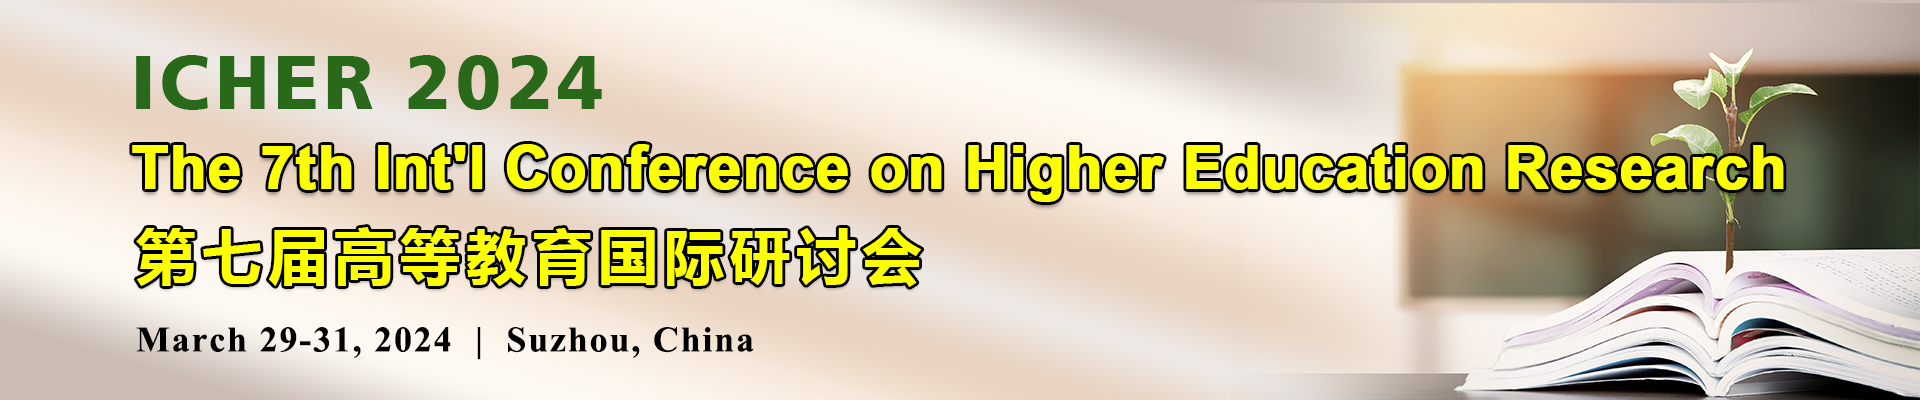 The 7th Int'l Conference on Higher Education Research (ICHER 2024), Suzhou, Jiangsu, China